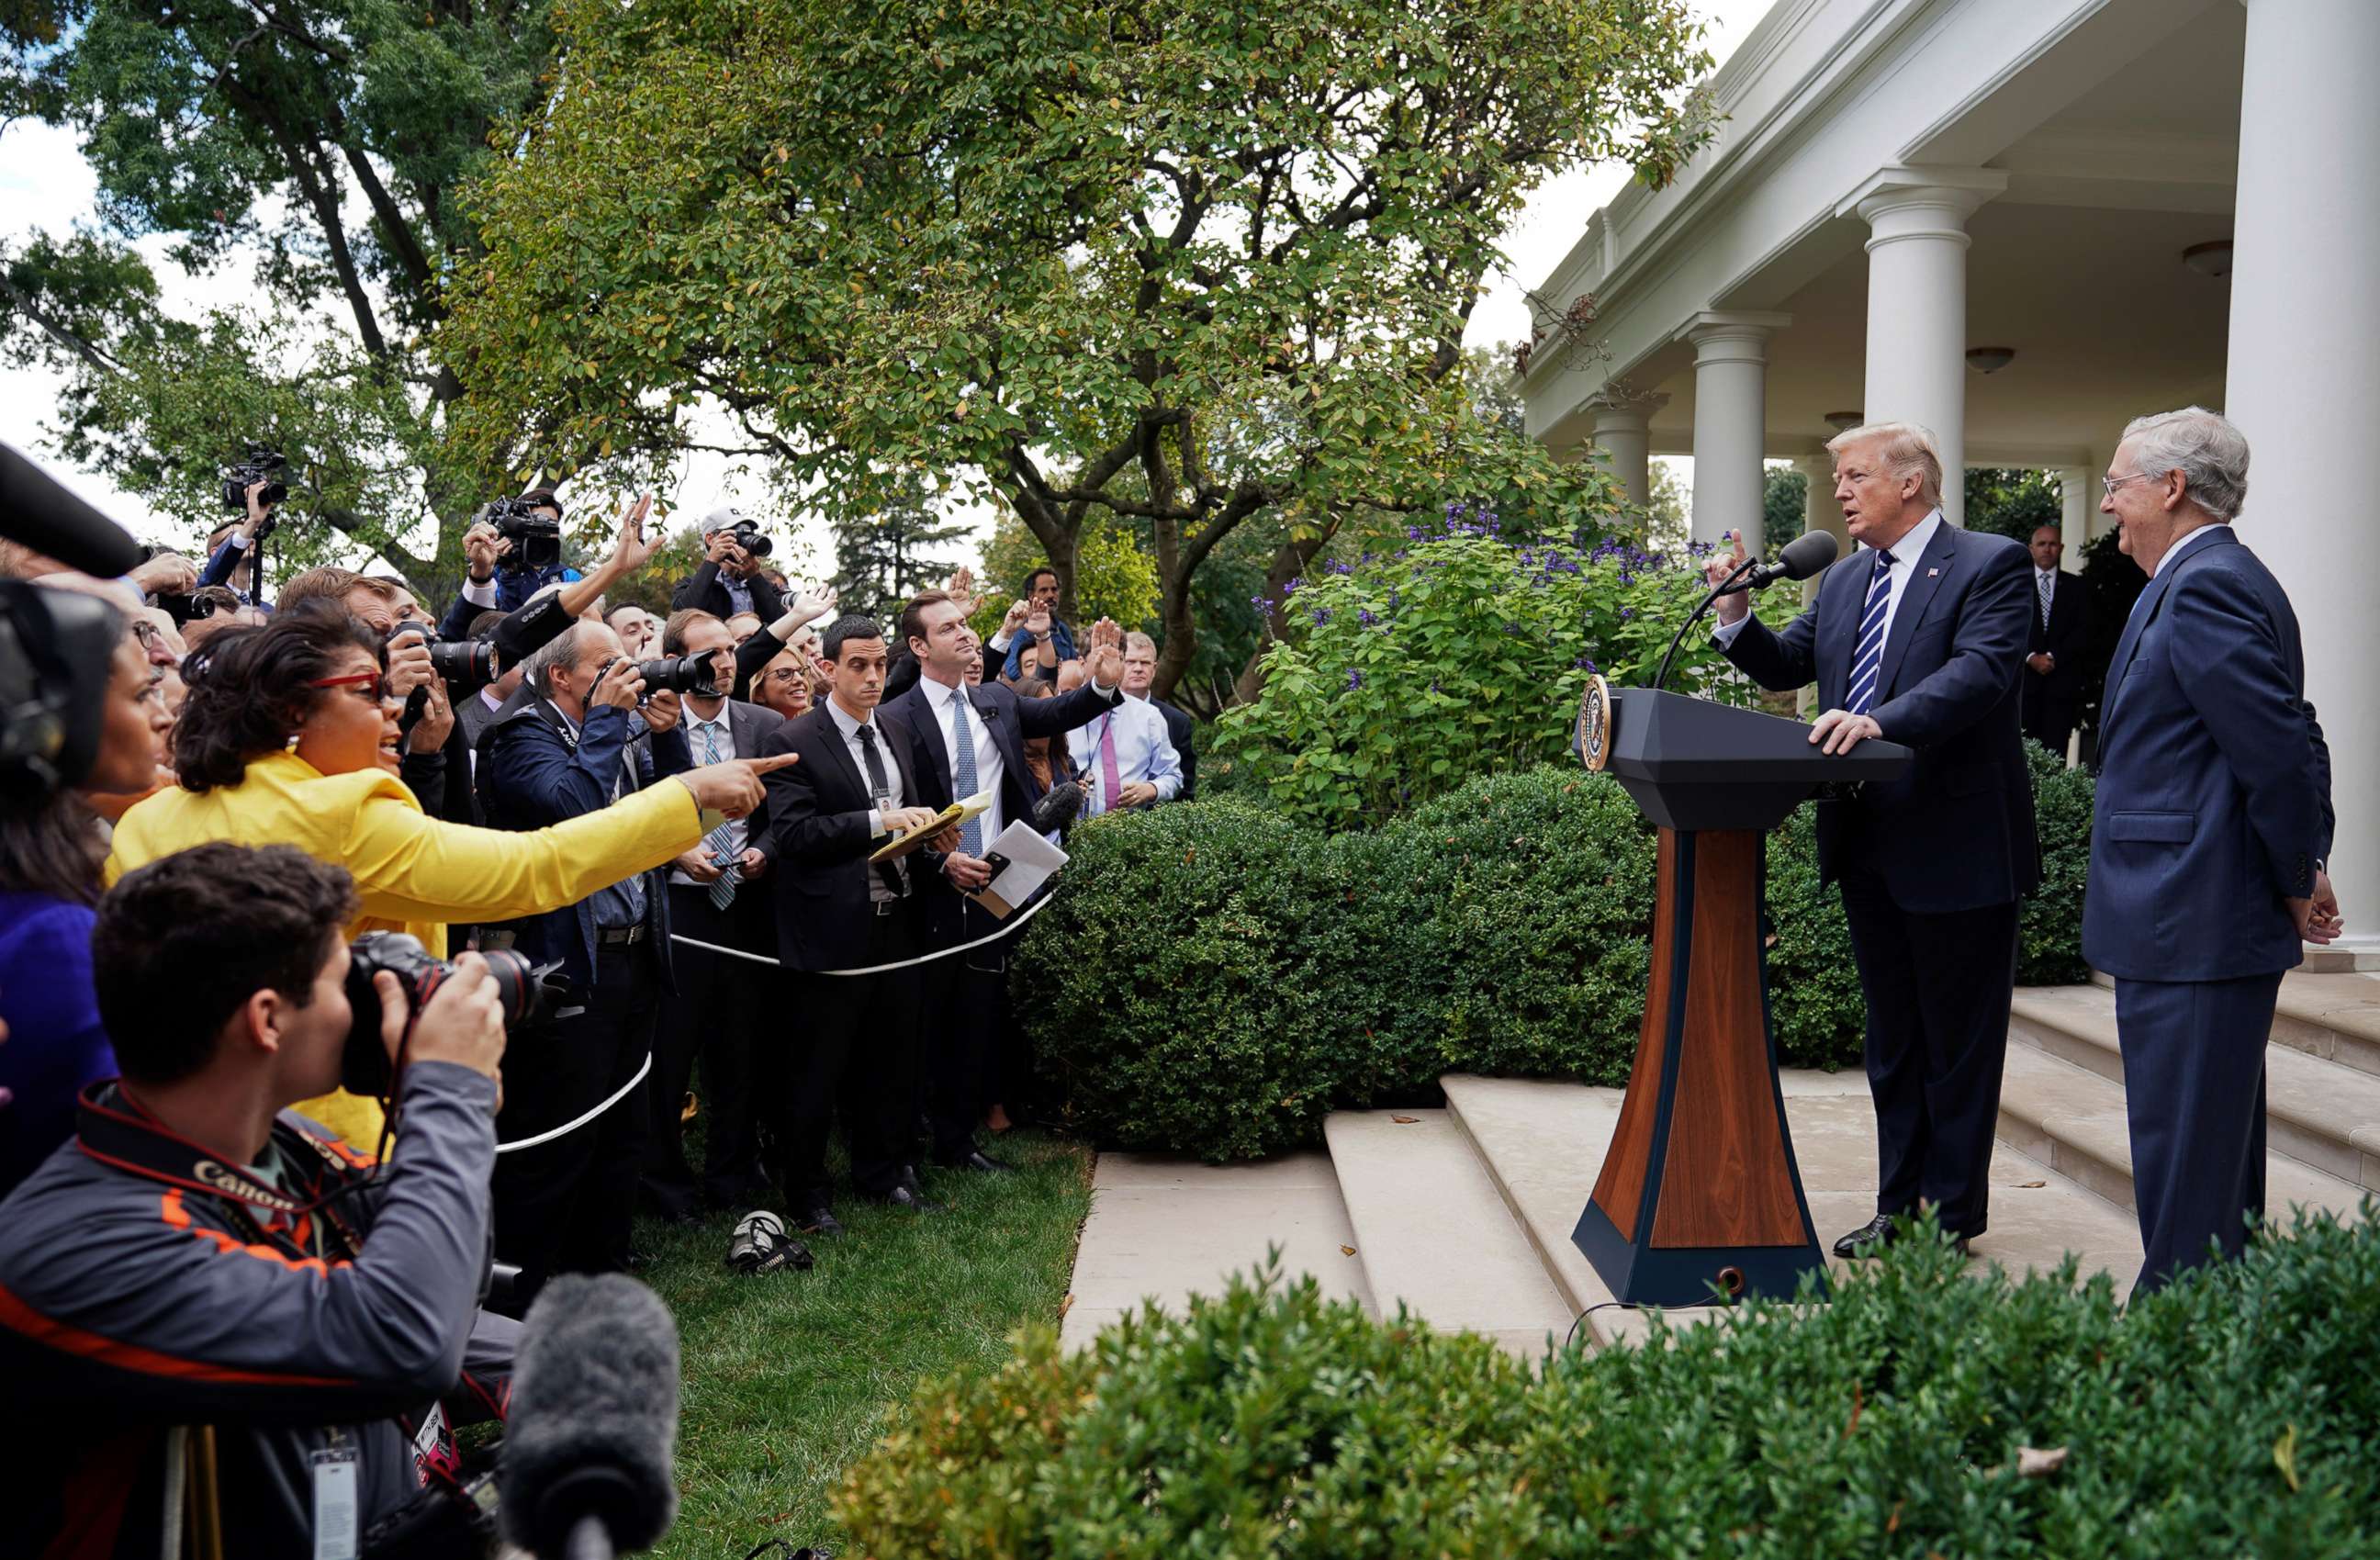 PHOTO: The Washington bureau chief for American Urban Radio Networks gestures as she asks questions to President Donald Trump and Senate Majority Leader Mitch McConnell of Ky., in the Rose Garden of the White House, Oct. 16, 2017.